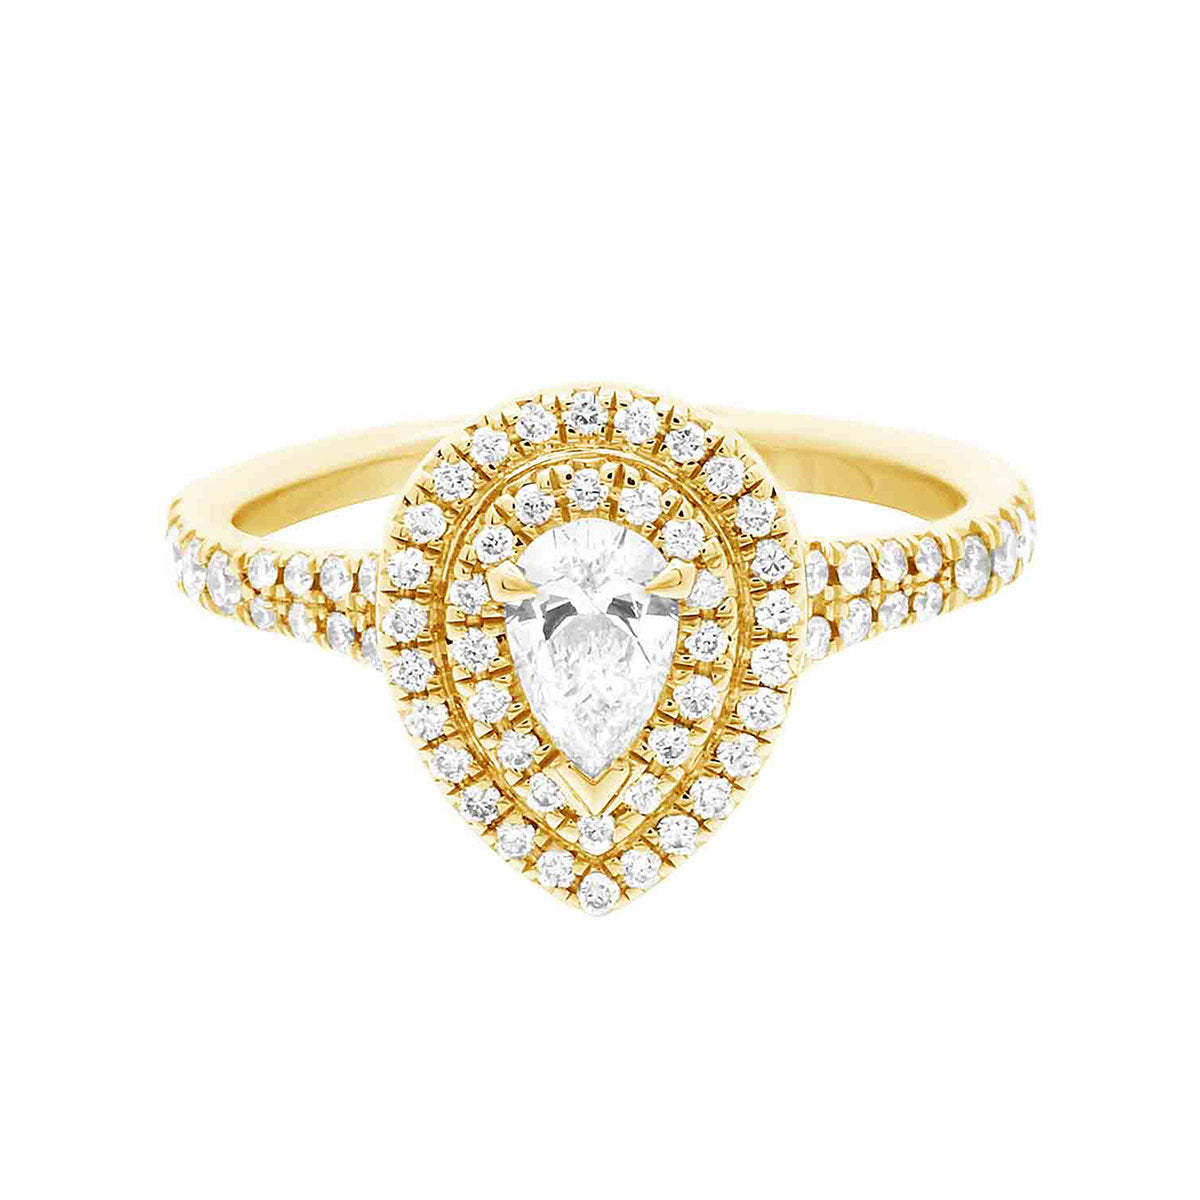 Double Halo Pear Diamond Ring in yellow gold